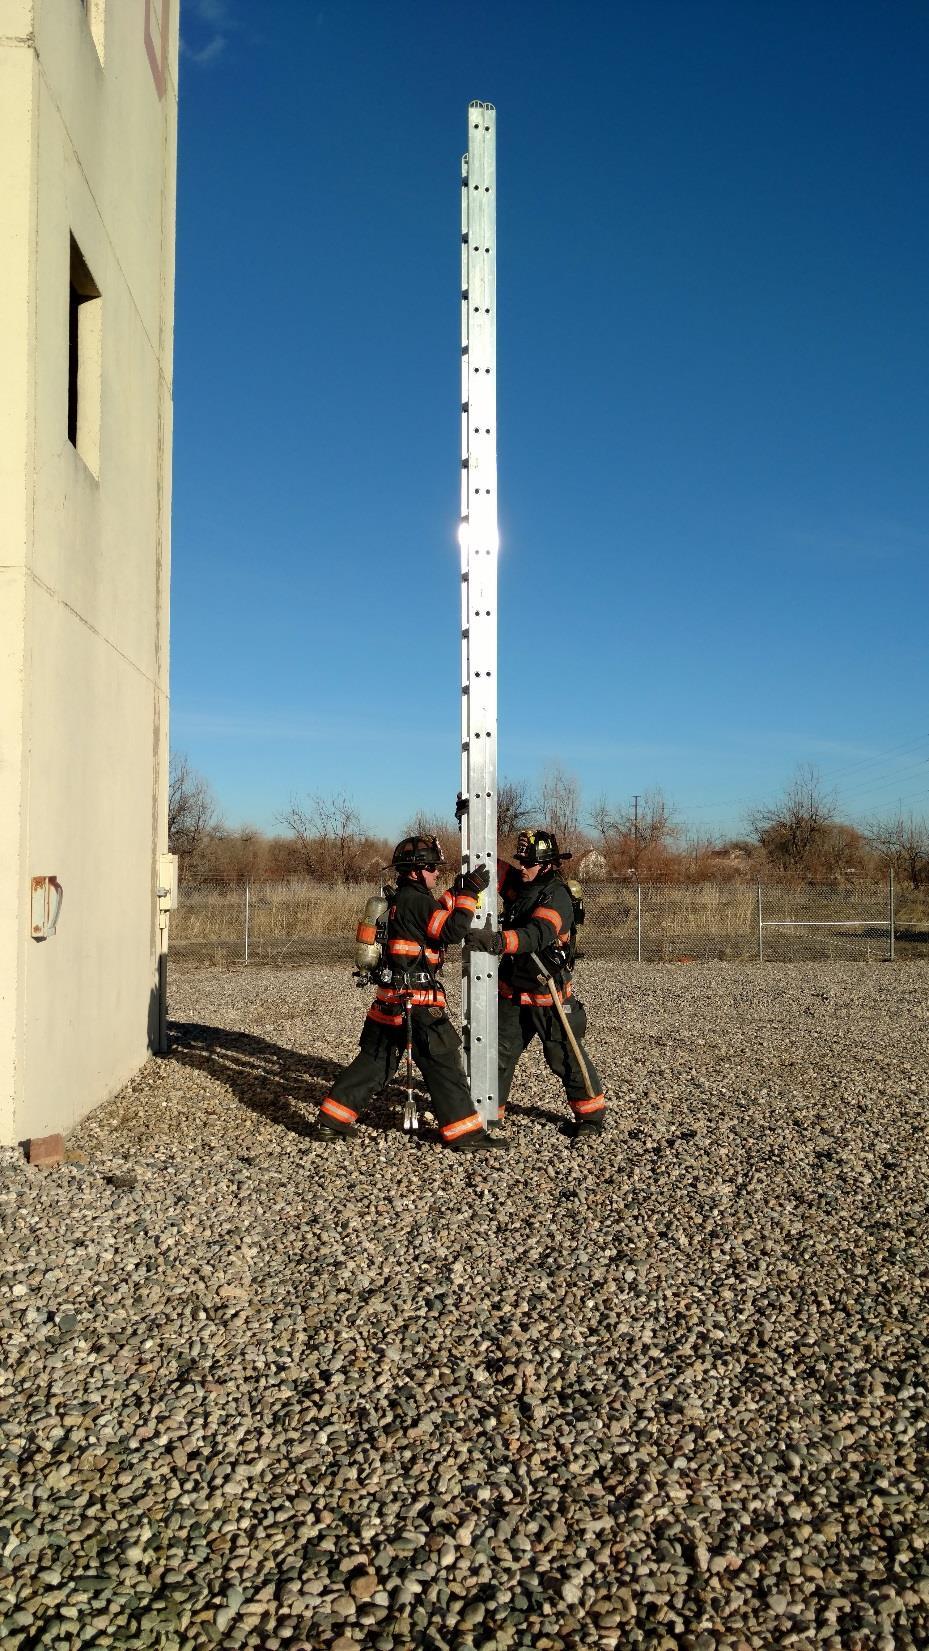 #5 Both of the firefighters will brace the ladder by placing a beam on the side of their leg (each beam is braced).